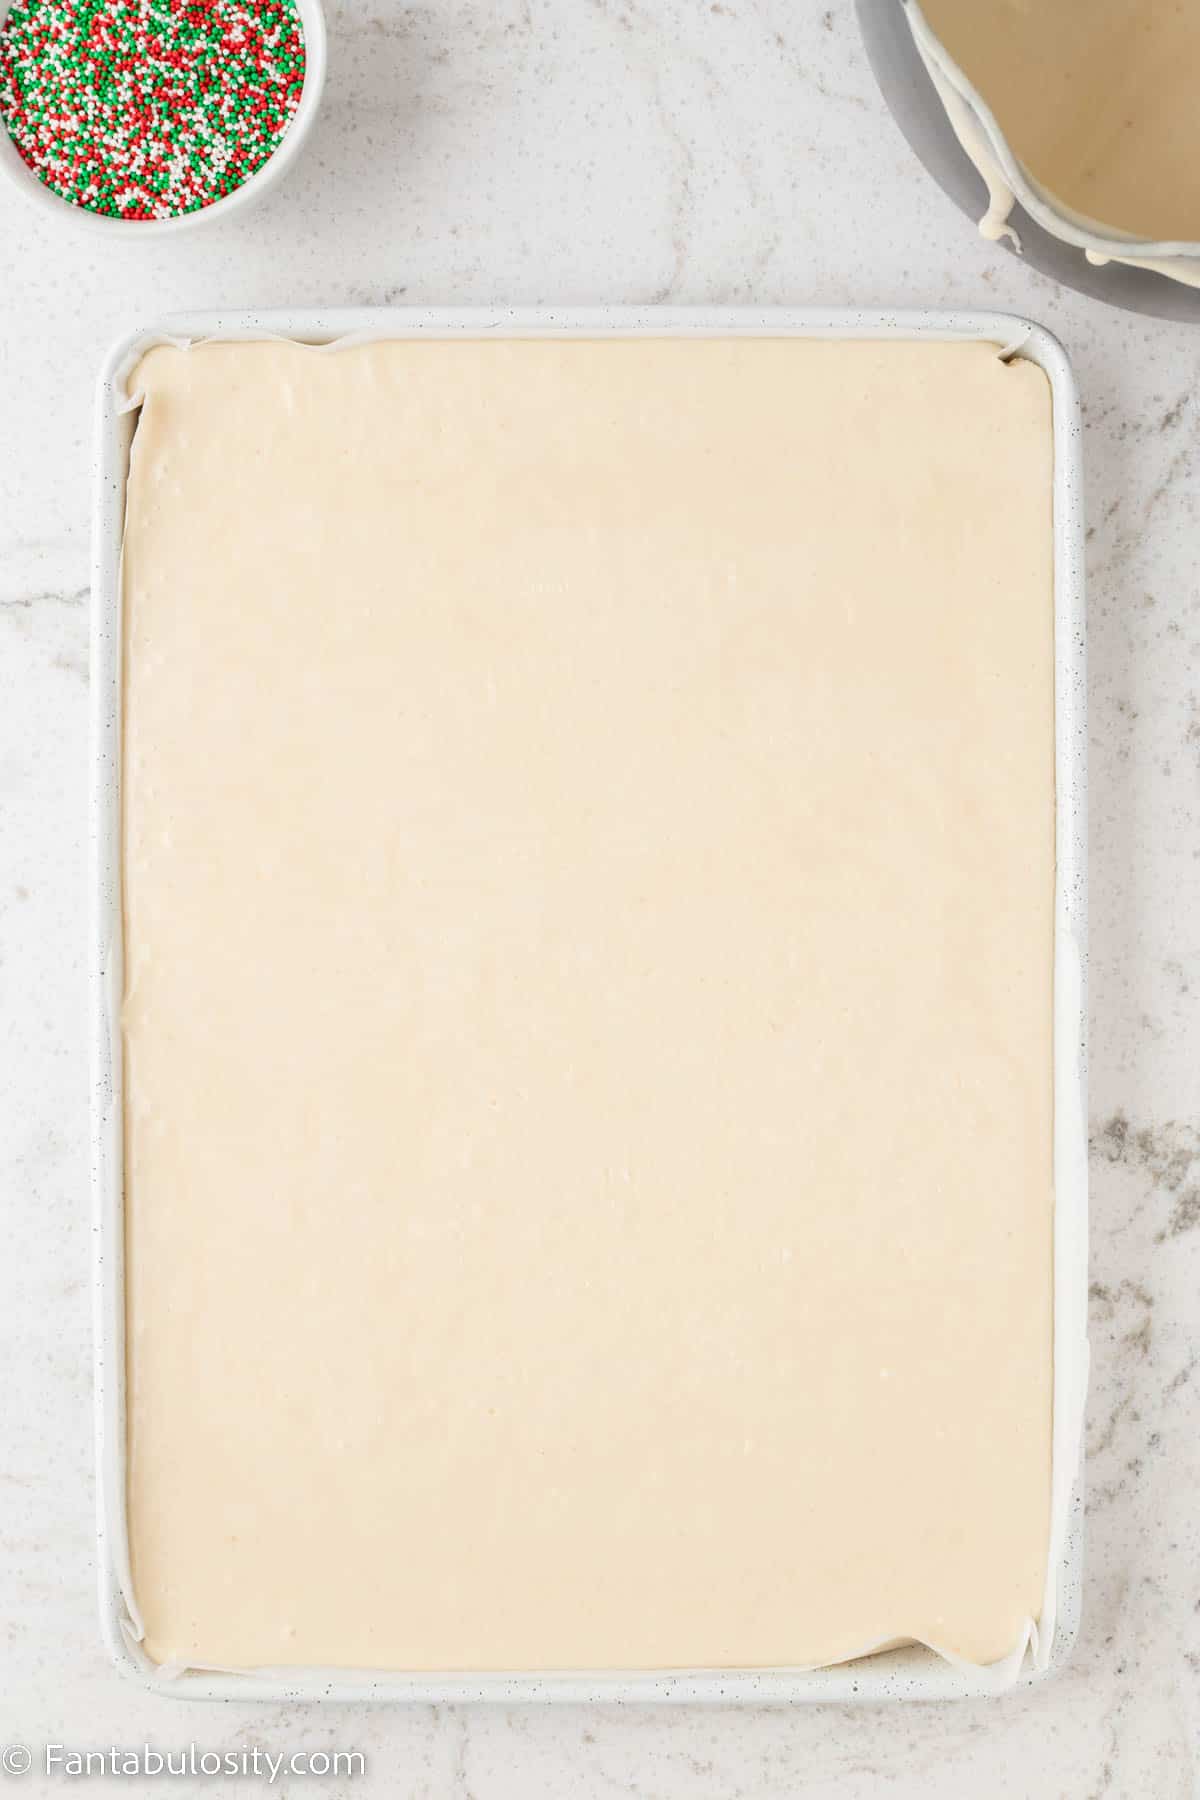 A 9x13 pan is filled with smooth white fudge